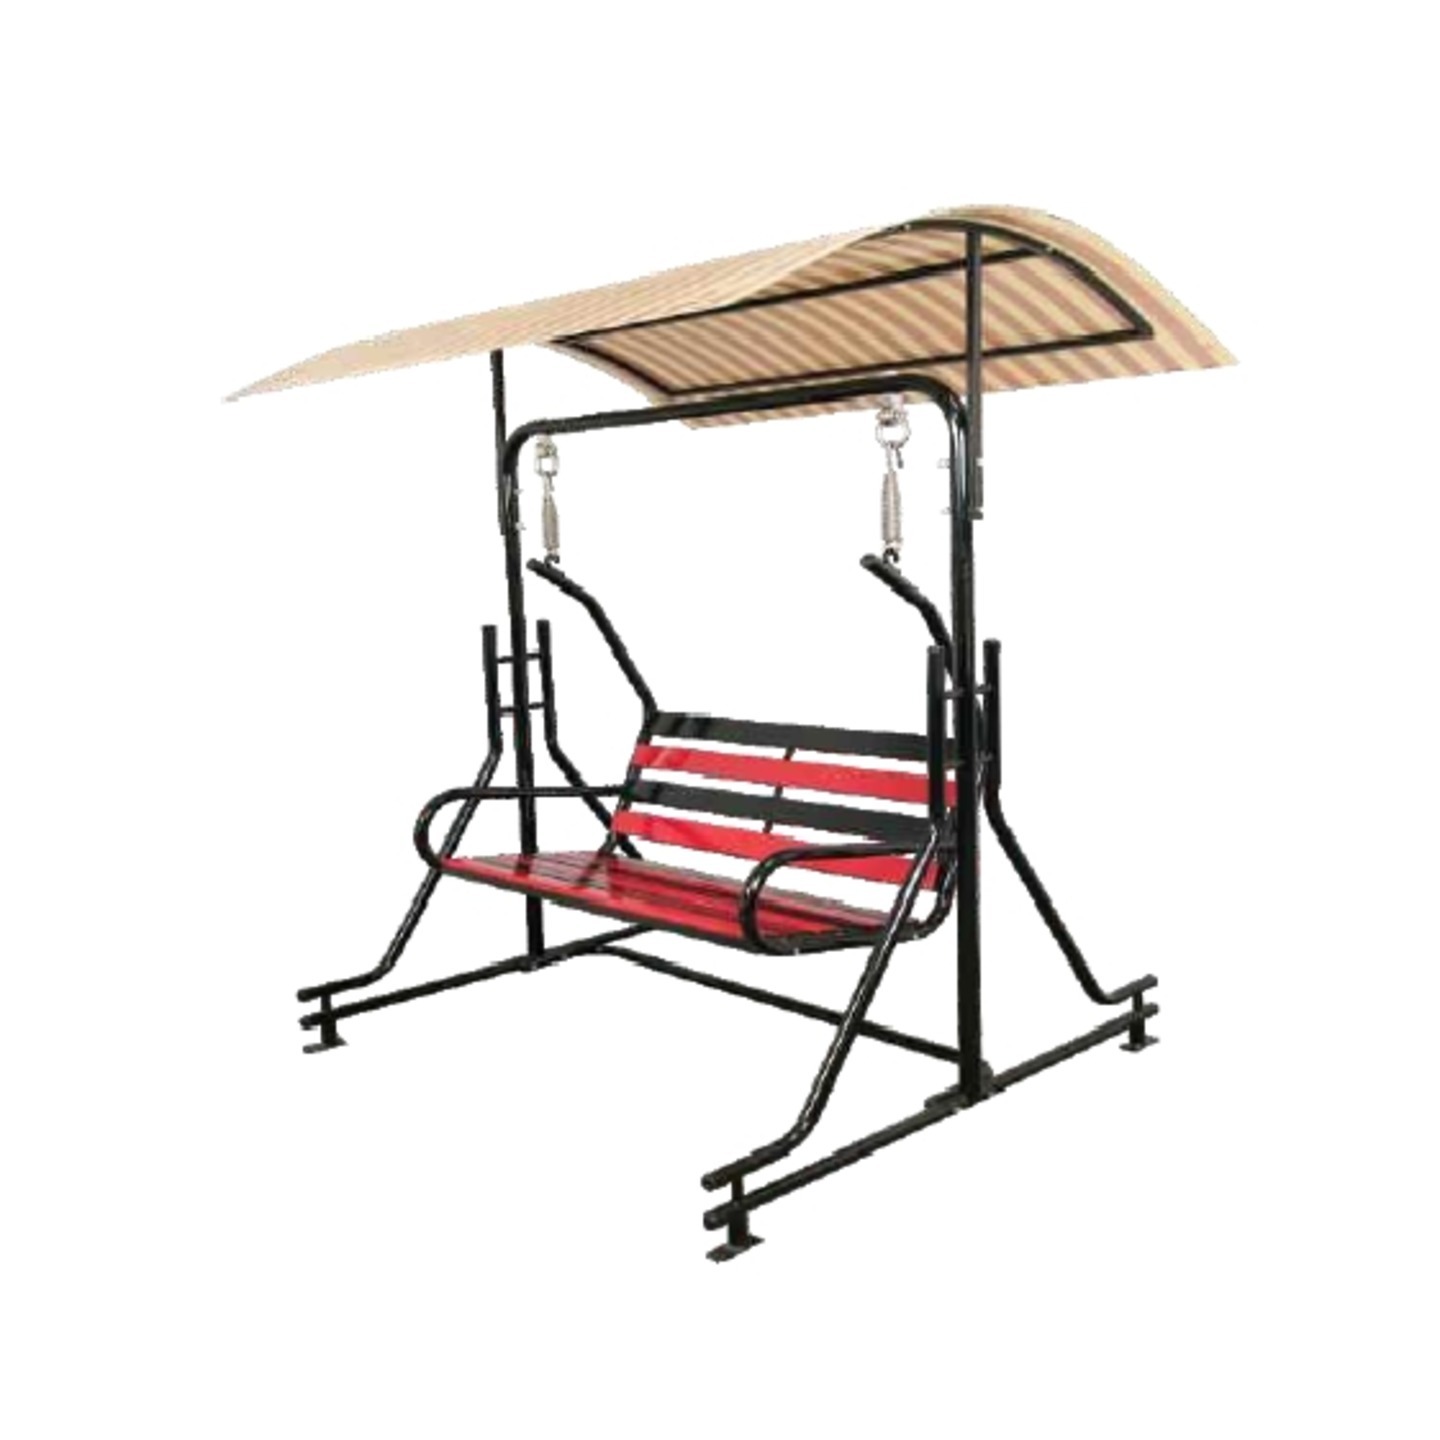 HJA Swing With Stand Roof HOJ-007 In Red & Black Colour